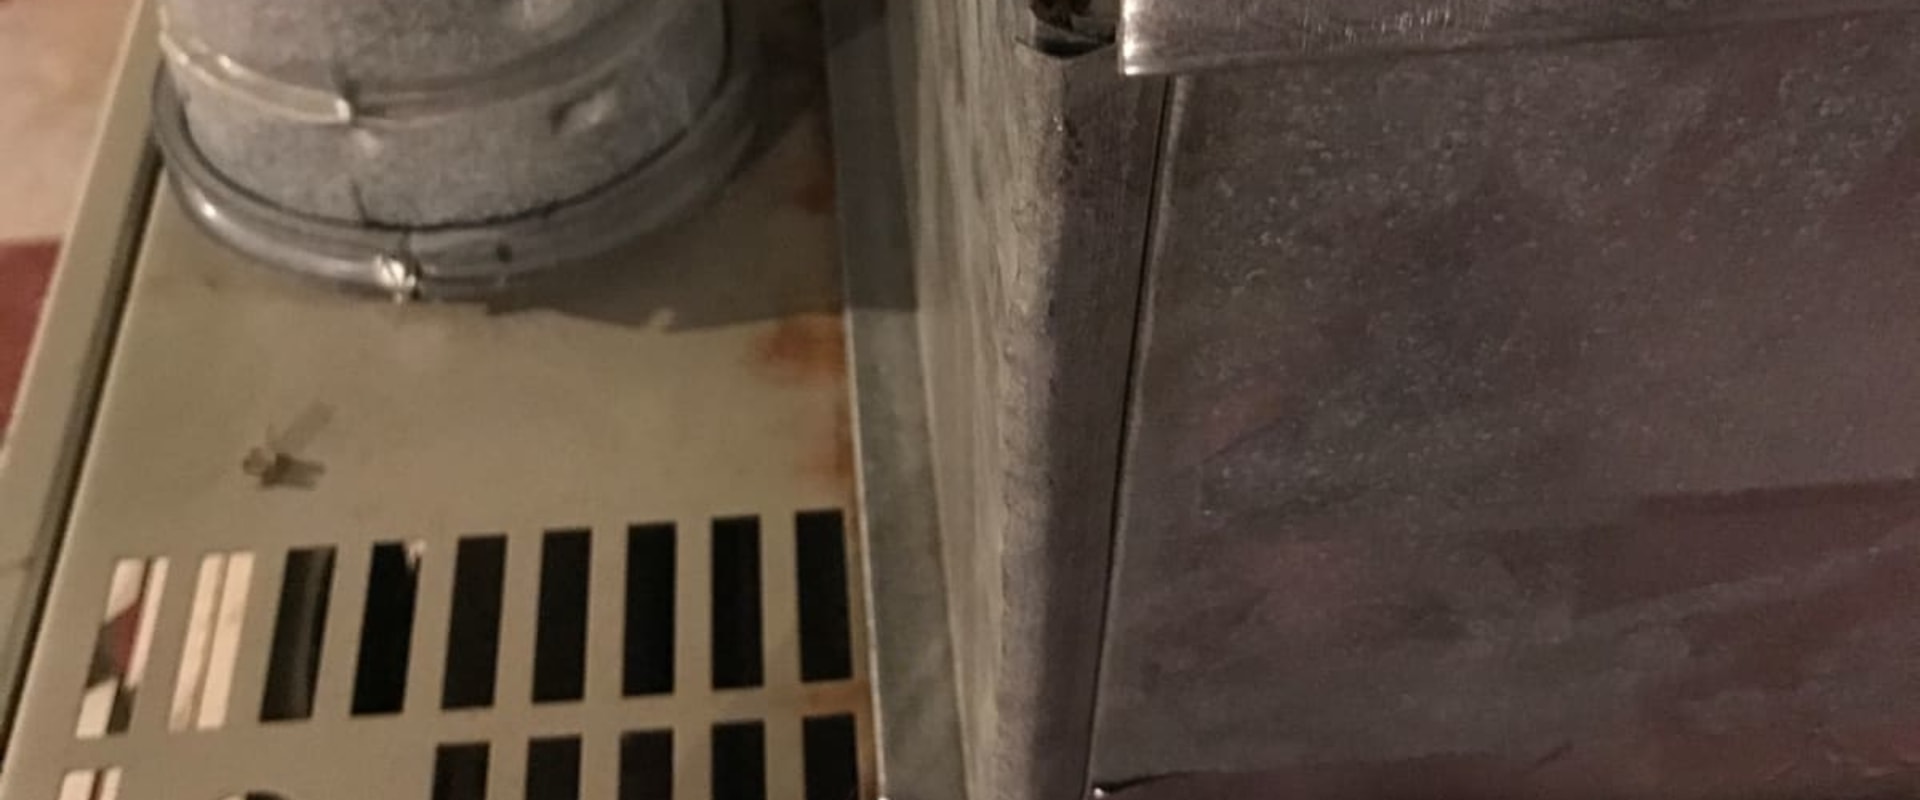 What should be used to seal leaks in ductwork?